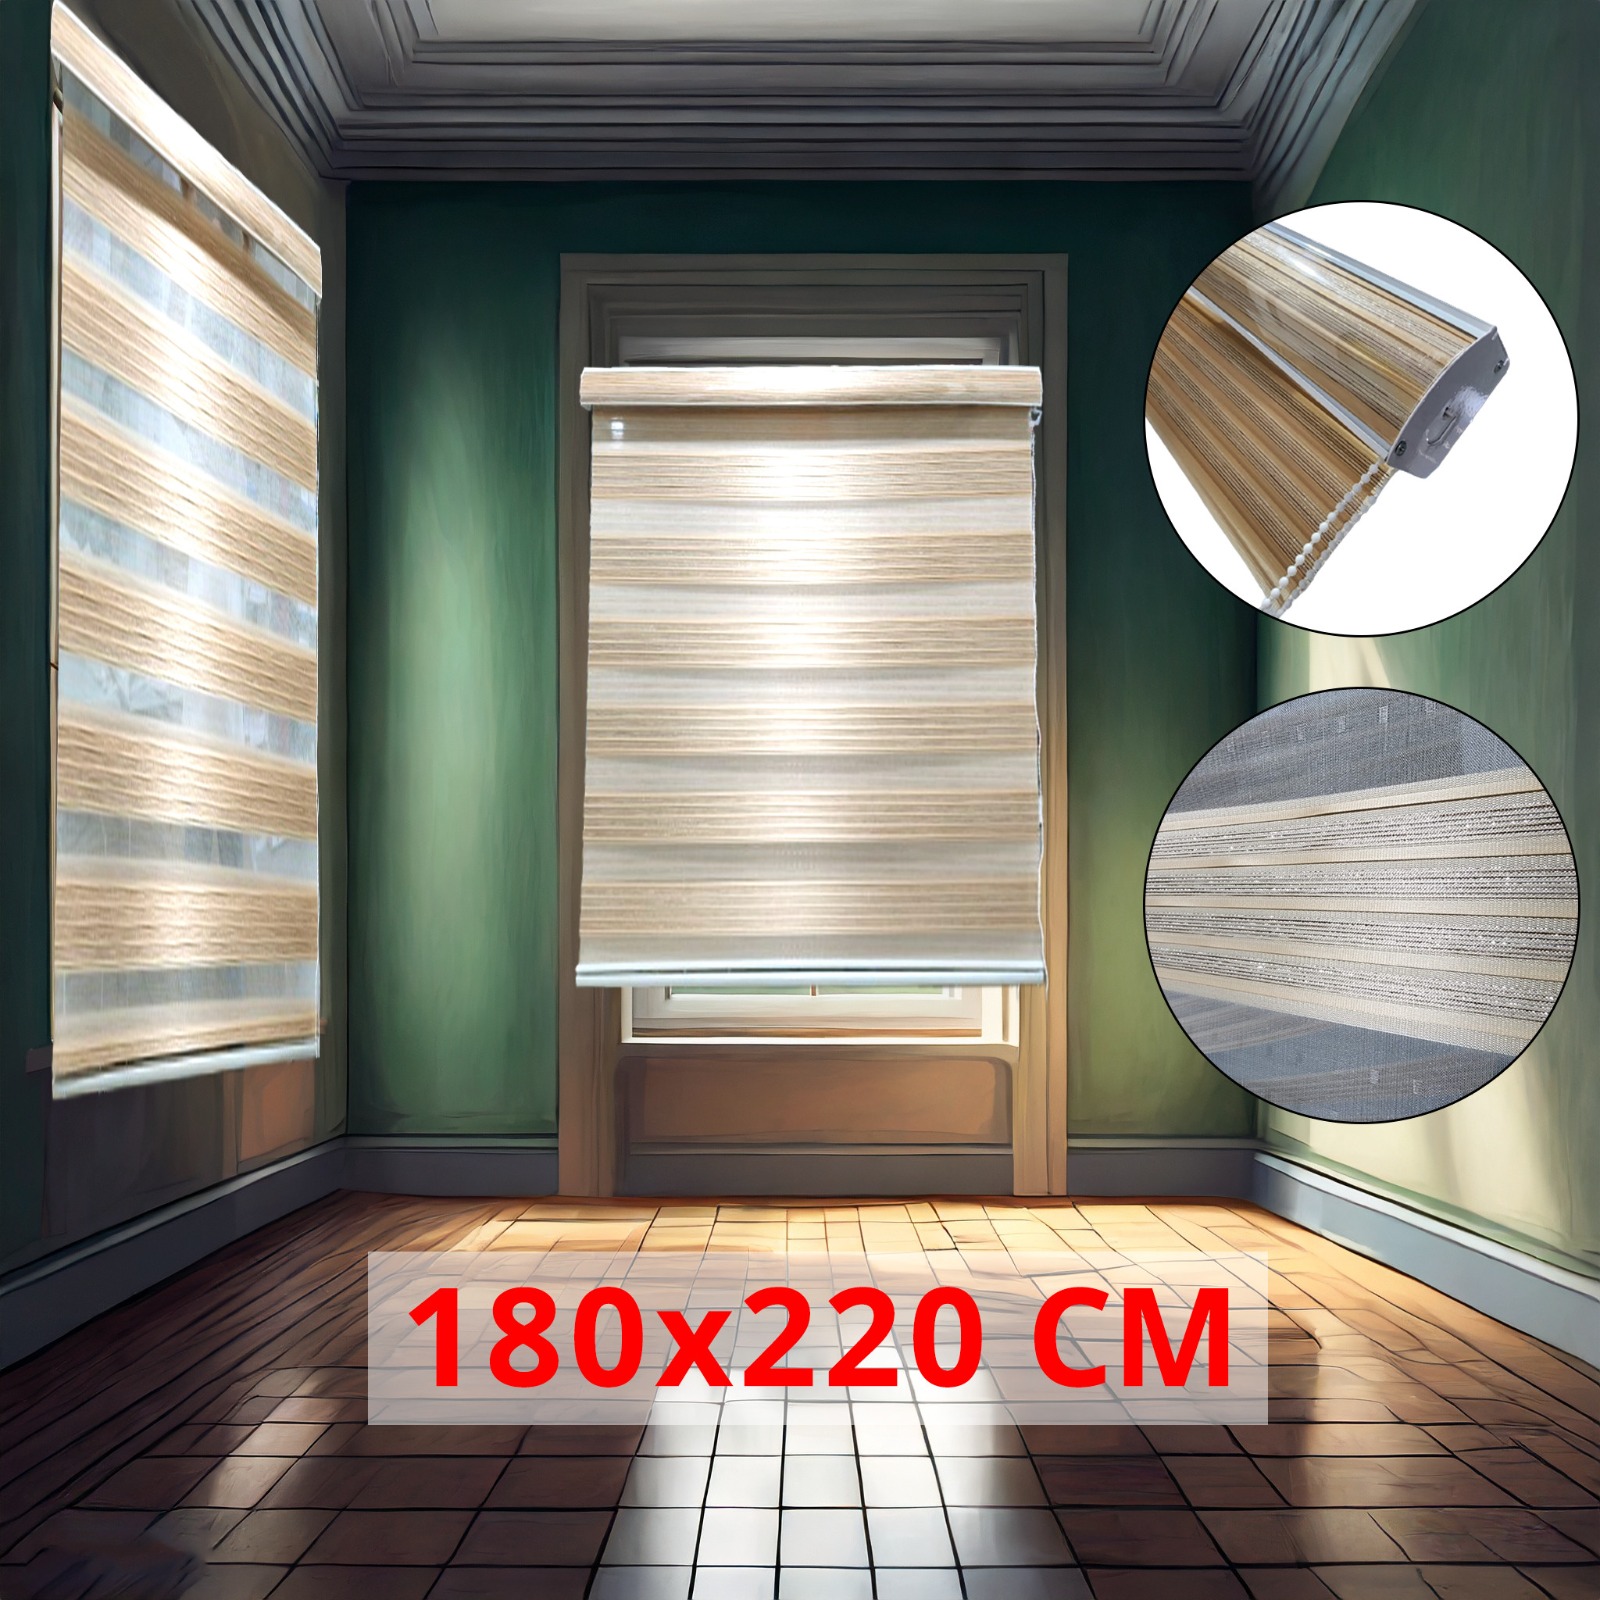 %28180%2A220cm+Glossy+Beige+%29+Modern+3D+Style+Window+and+Door+Roller+Blind